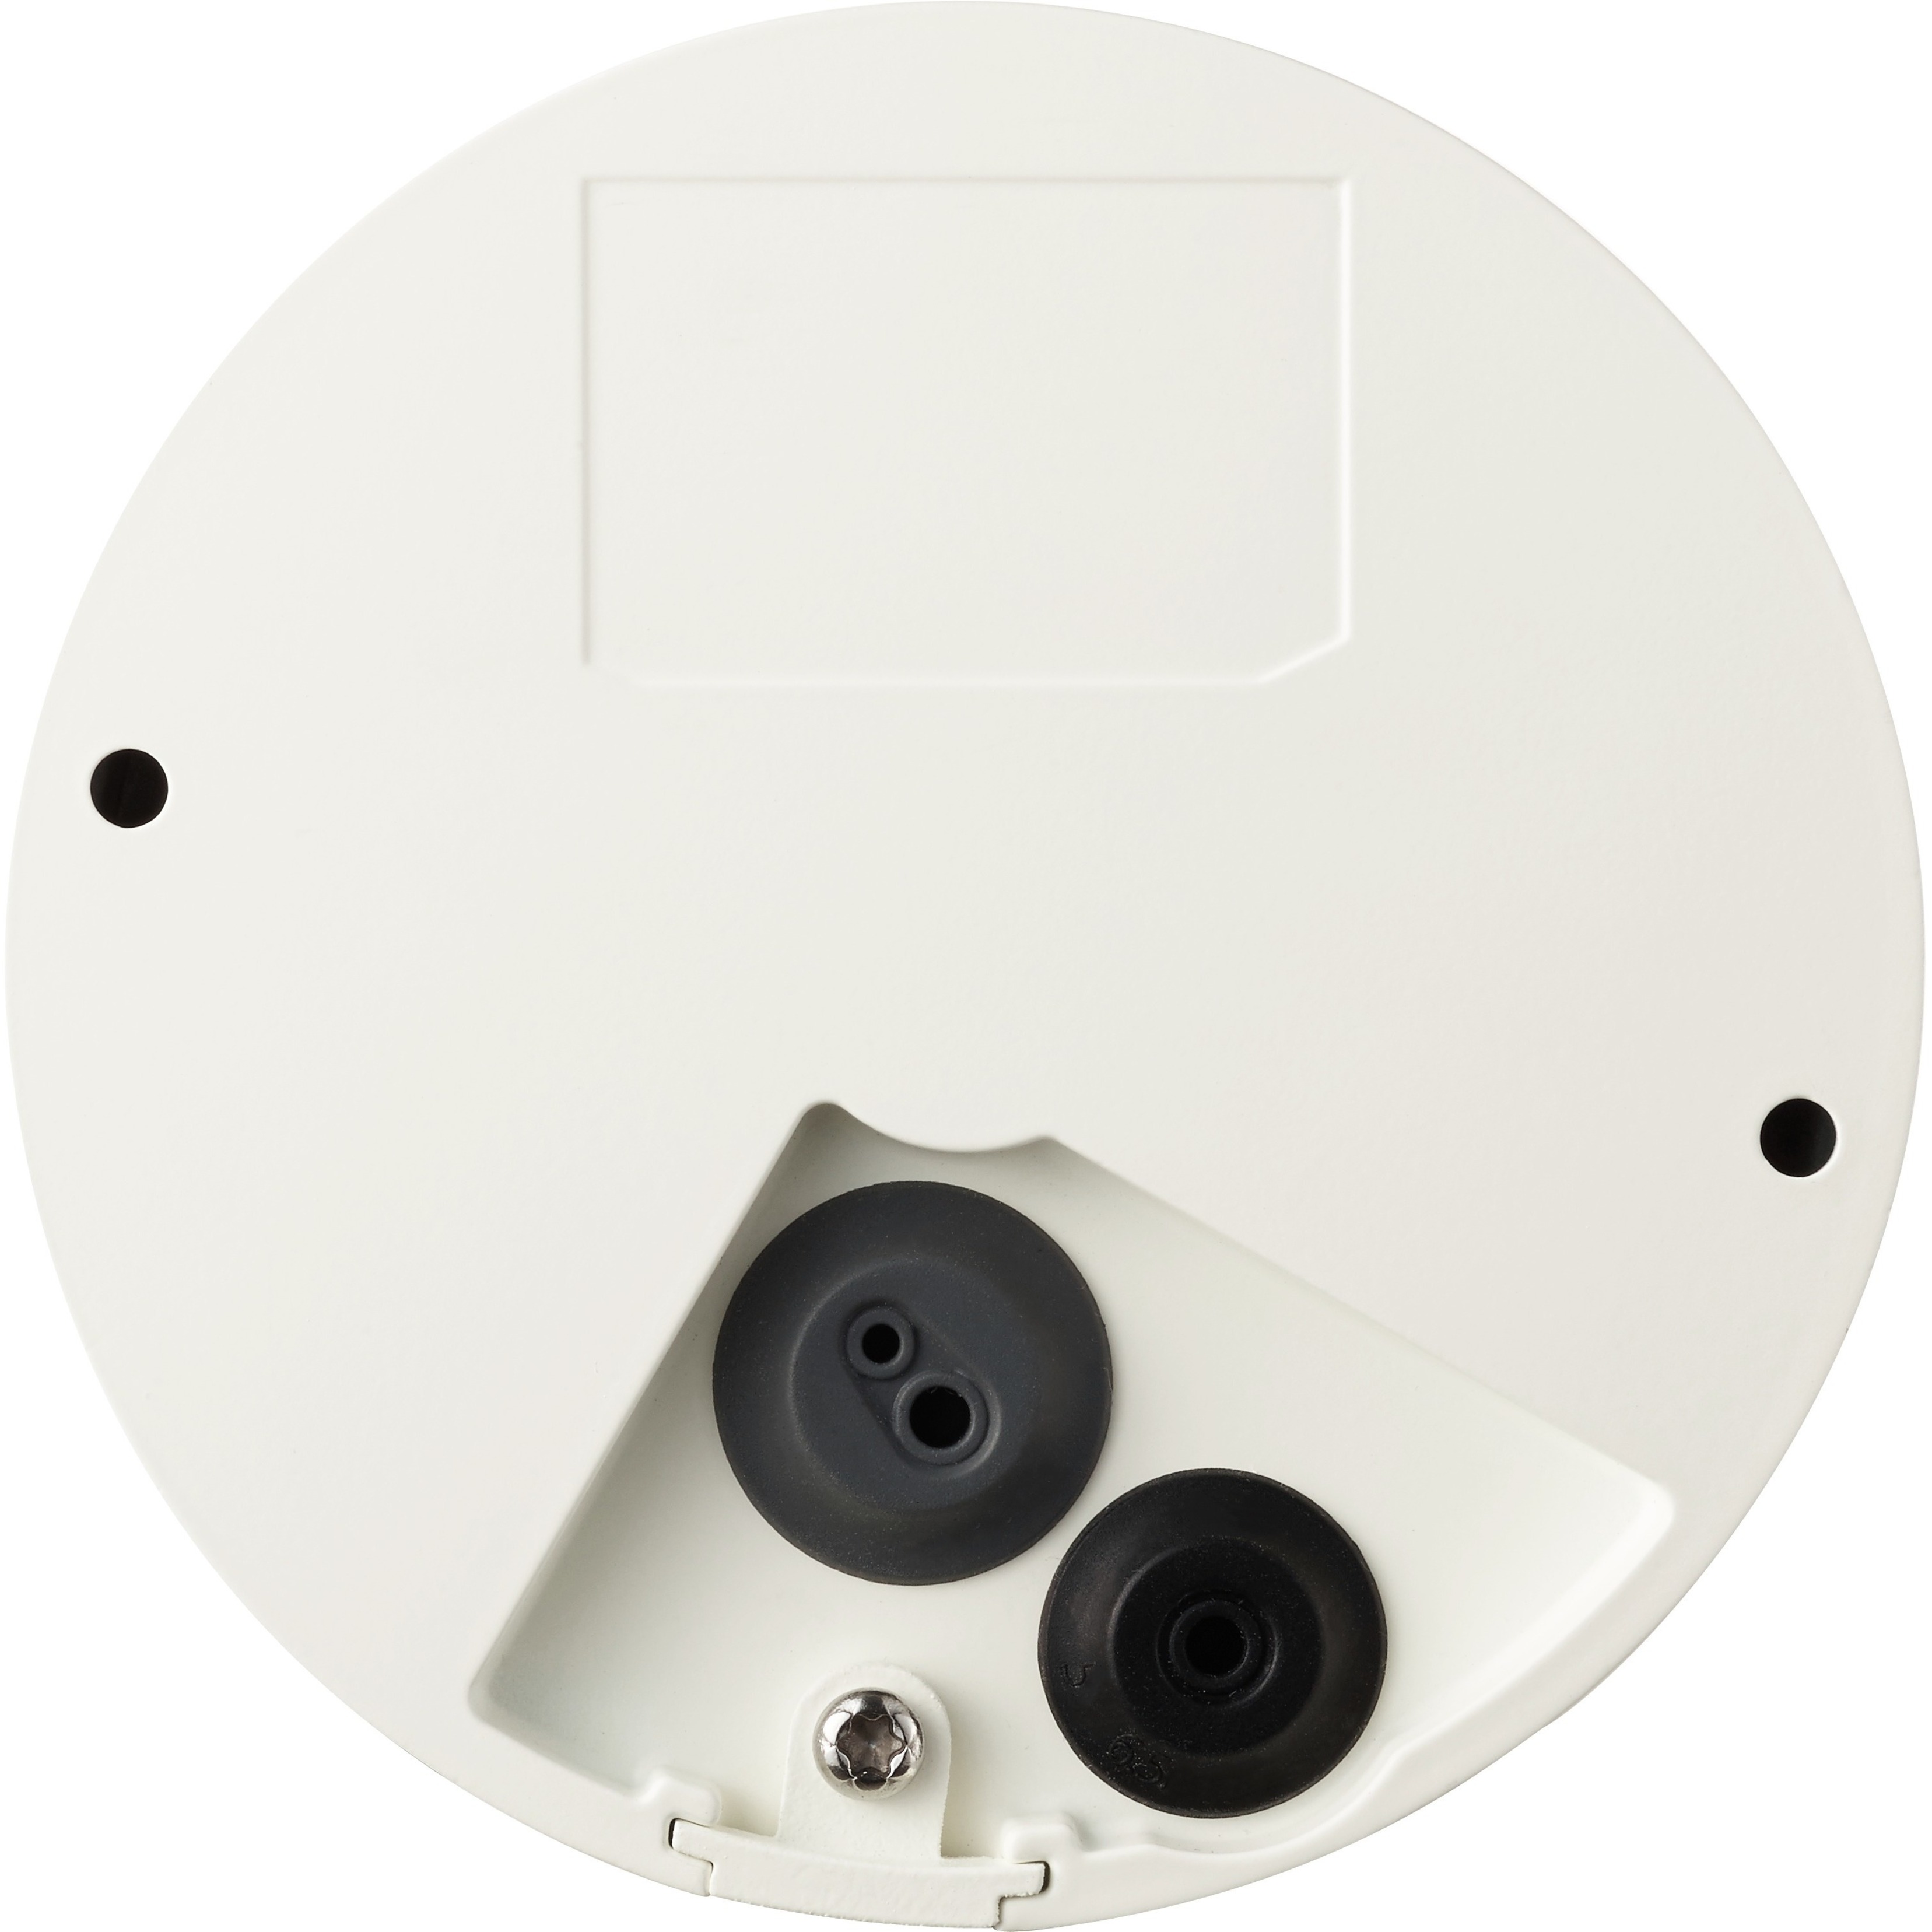 Wisenet XNV-6010 2 Megapixel Outdoor Full HD Network Camera, Monochrome, Color, Dome, Ivory - image 3 of 3